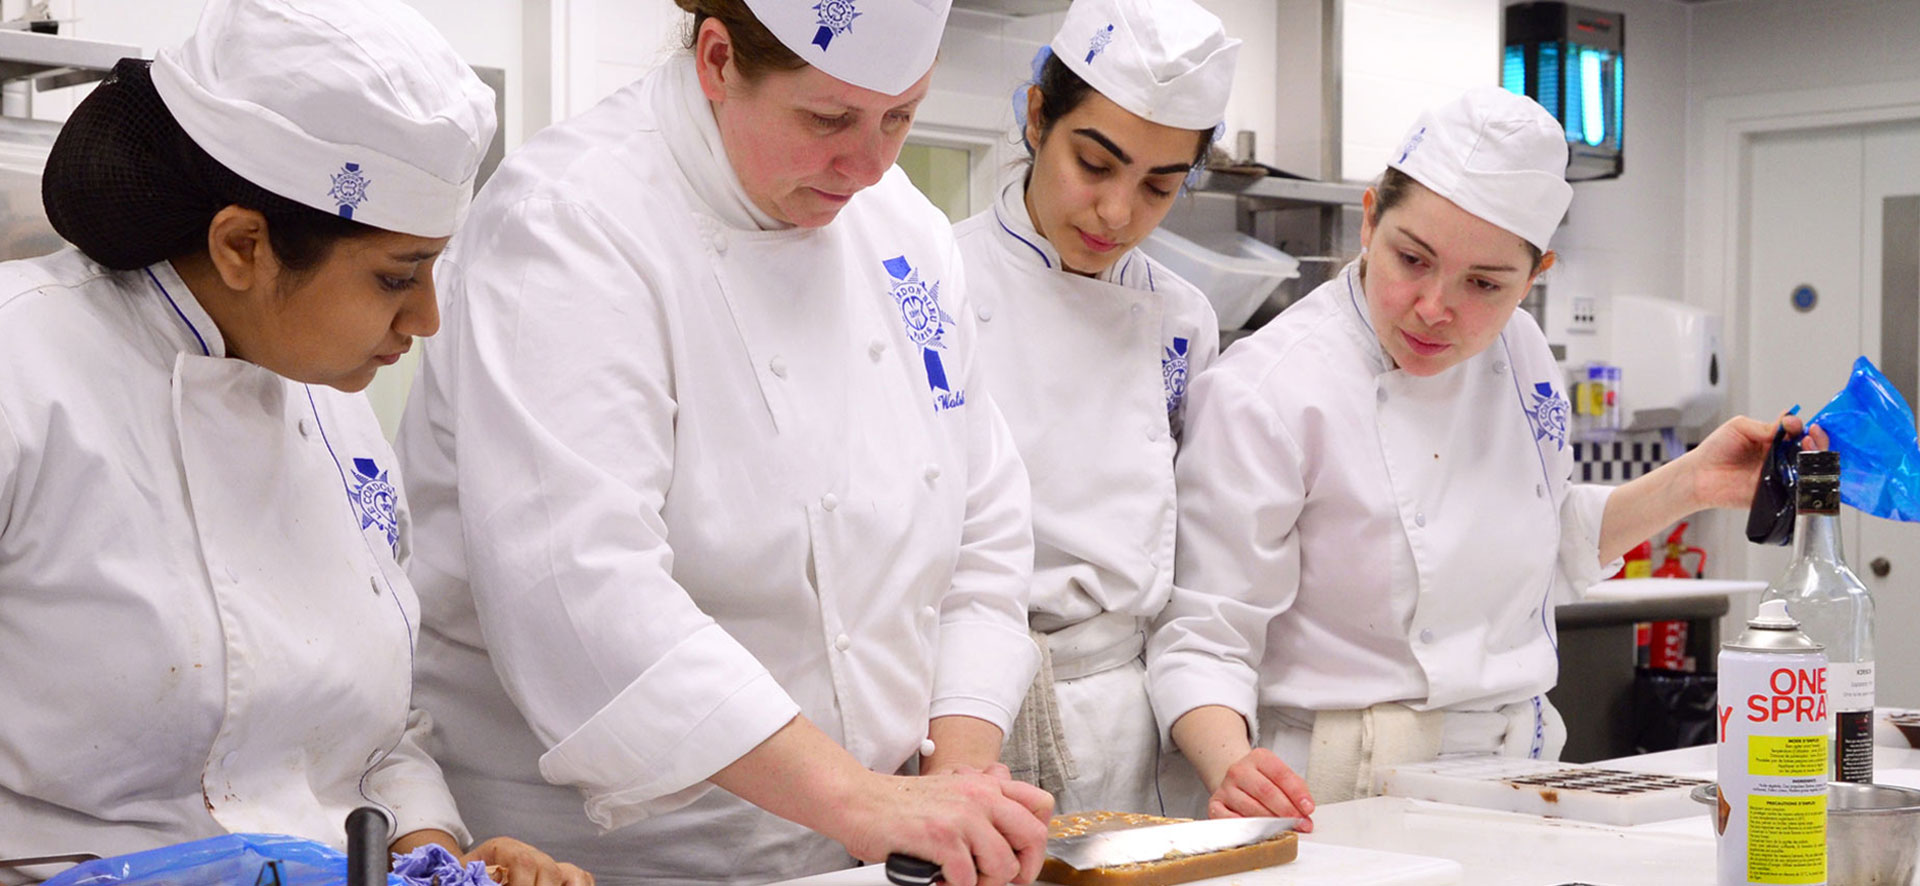 Learn How to Become a Pastry Chef - Le Cordon Bleu London